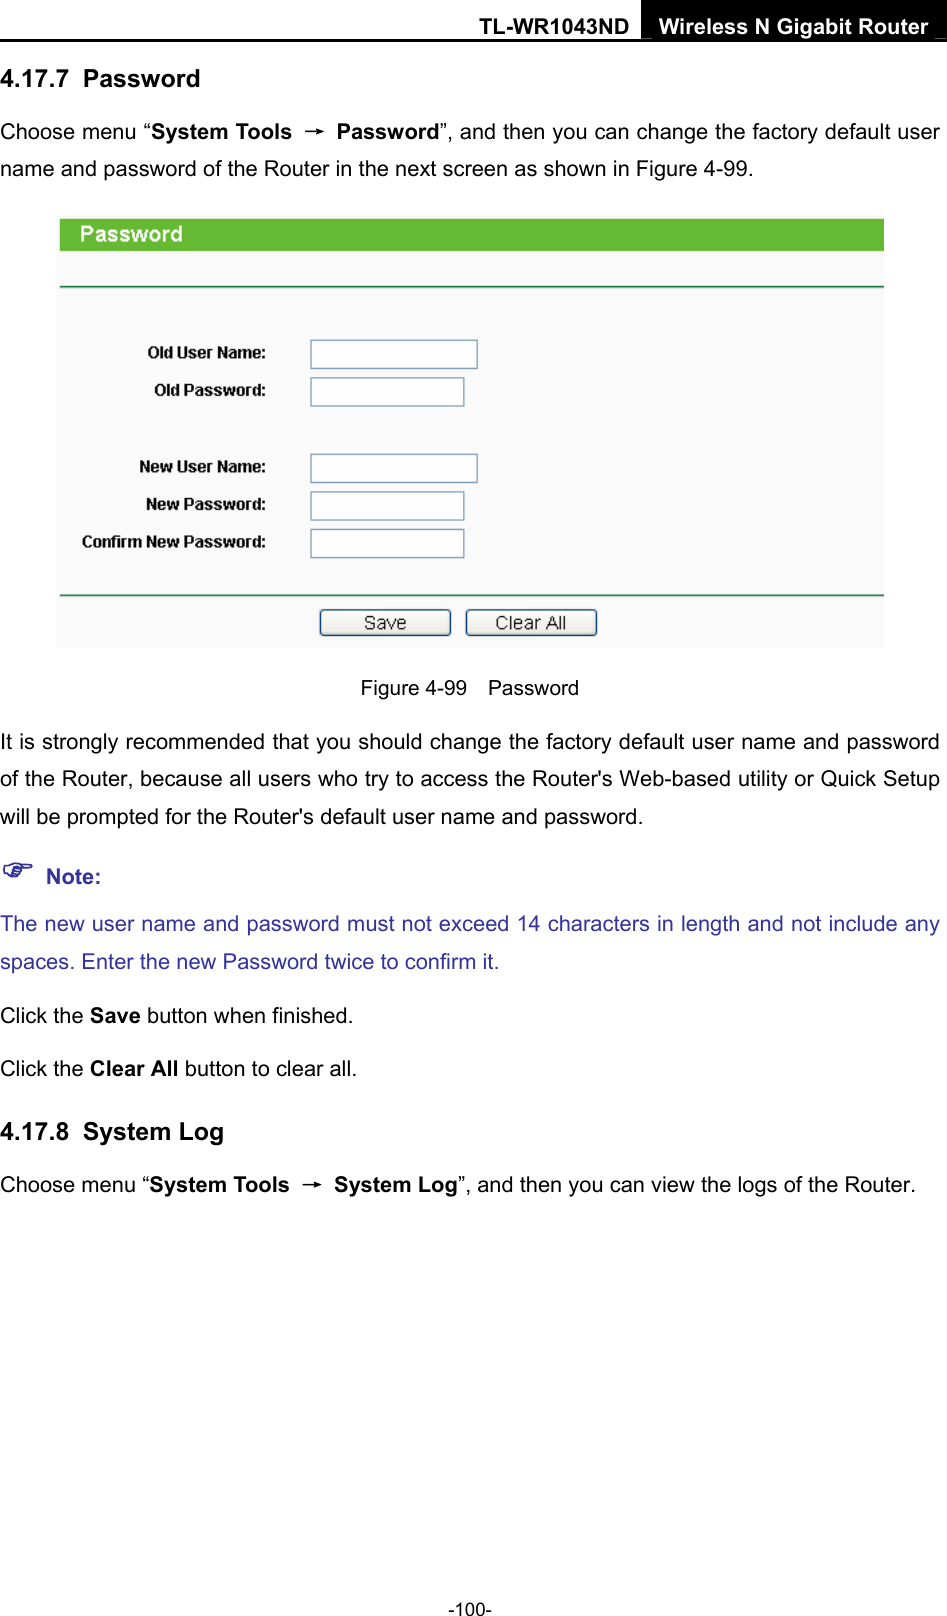 TL-WR1043ND Wireless N Gigabit Router  -100- 4.17.7  Password Choose menu “System Tools  → Password”, and then you can change the factory default user name and password of the Router in the next screen as shown in Figure 4-99.  Figure 4-99  Password It is strongly recommended that you should change the factory default user name and password of the Router, because all users who try to access the Router&apos;s Web-based utility or Quick Setup will be prompted for the Router&apos;s default user name and password. ) Note: The new user name and password must not exceed 14 characters in length and not include any spaces. Enter the new Password twice to confirm it. Click the Save button when finished. Click the Clear All button to clear all. 4.17.8  System Log Choose menu “System Tools  → System Log”, and then you can view the logs of the Router. 